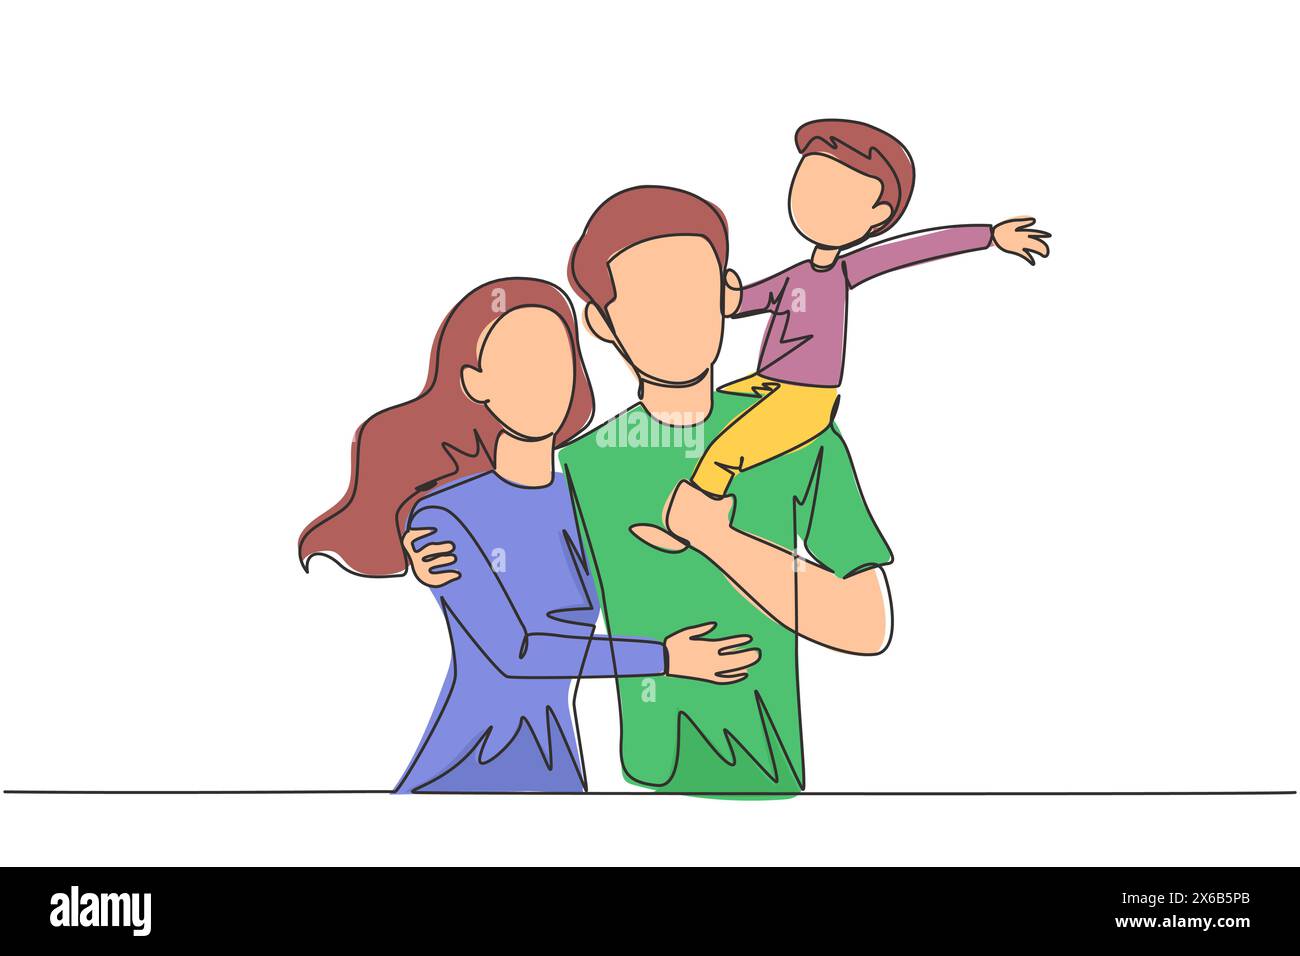 Single one line drawing of young woman hug her handsome husband who is holding their little cute son. Smiling couple with child. Happy family concept. Stock Vector